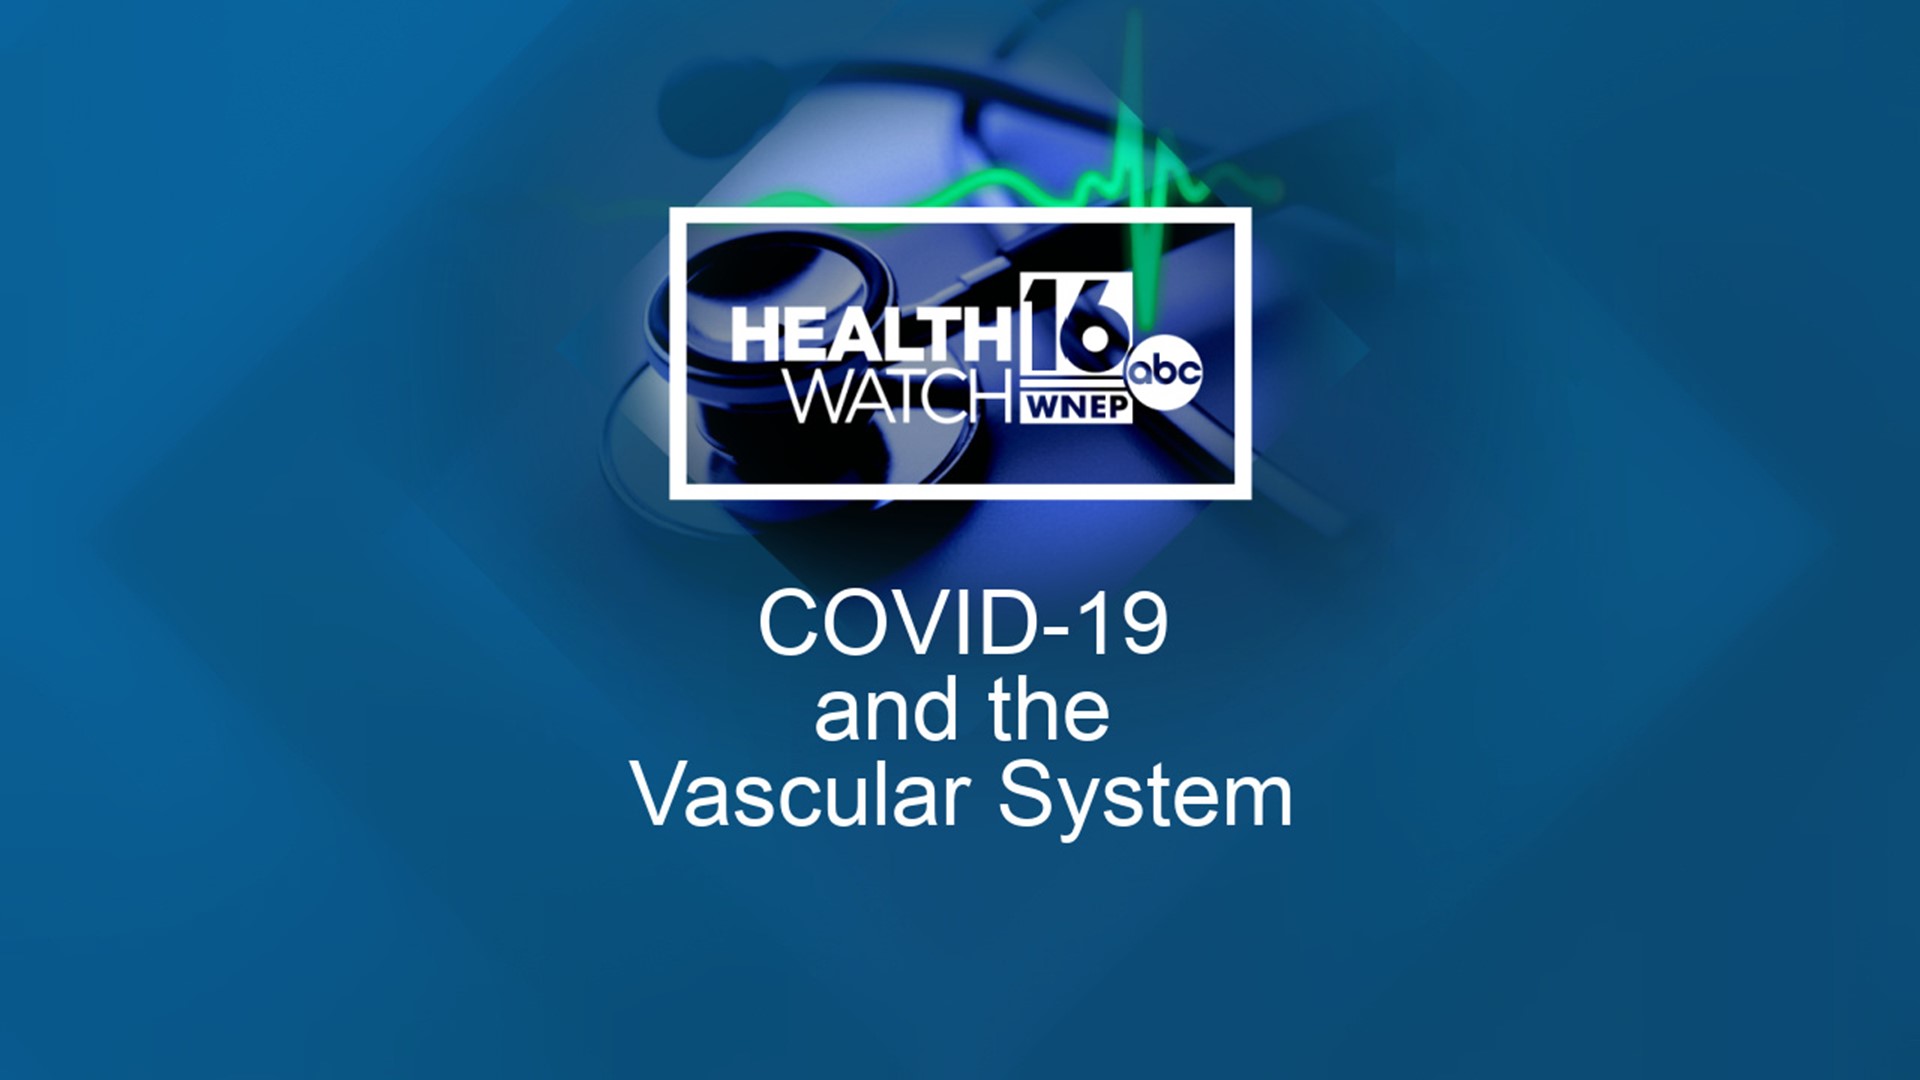 COVID-19 is categorized as a respiratory virus, but experts say it can affect many systems in the body, including the vascular system.